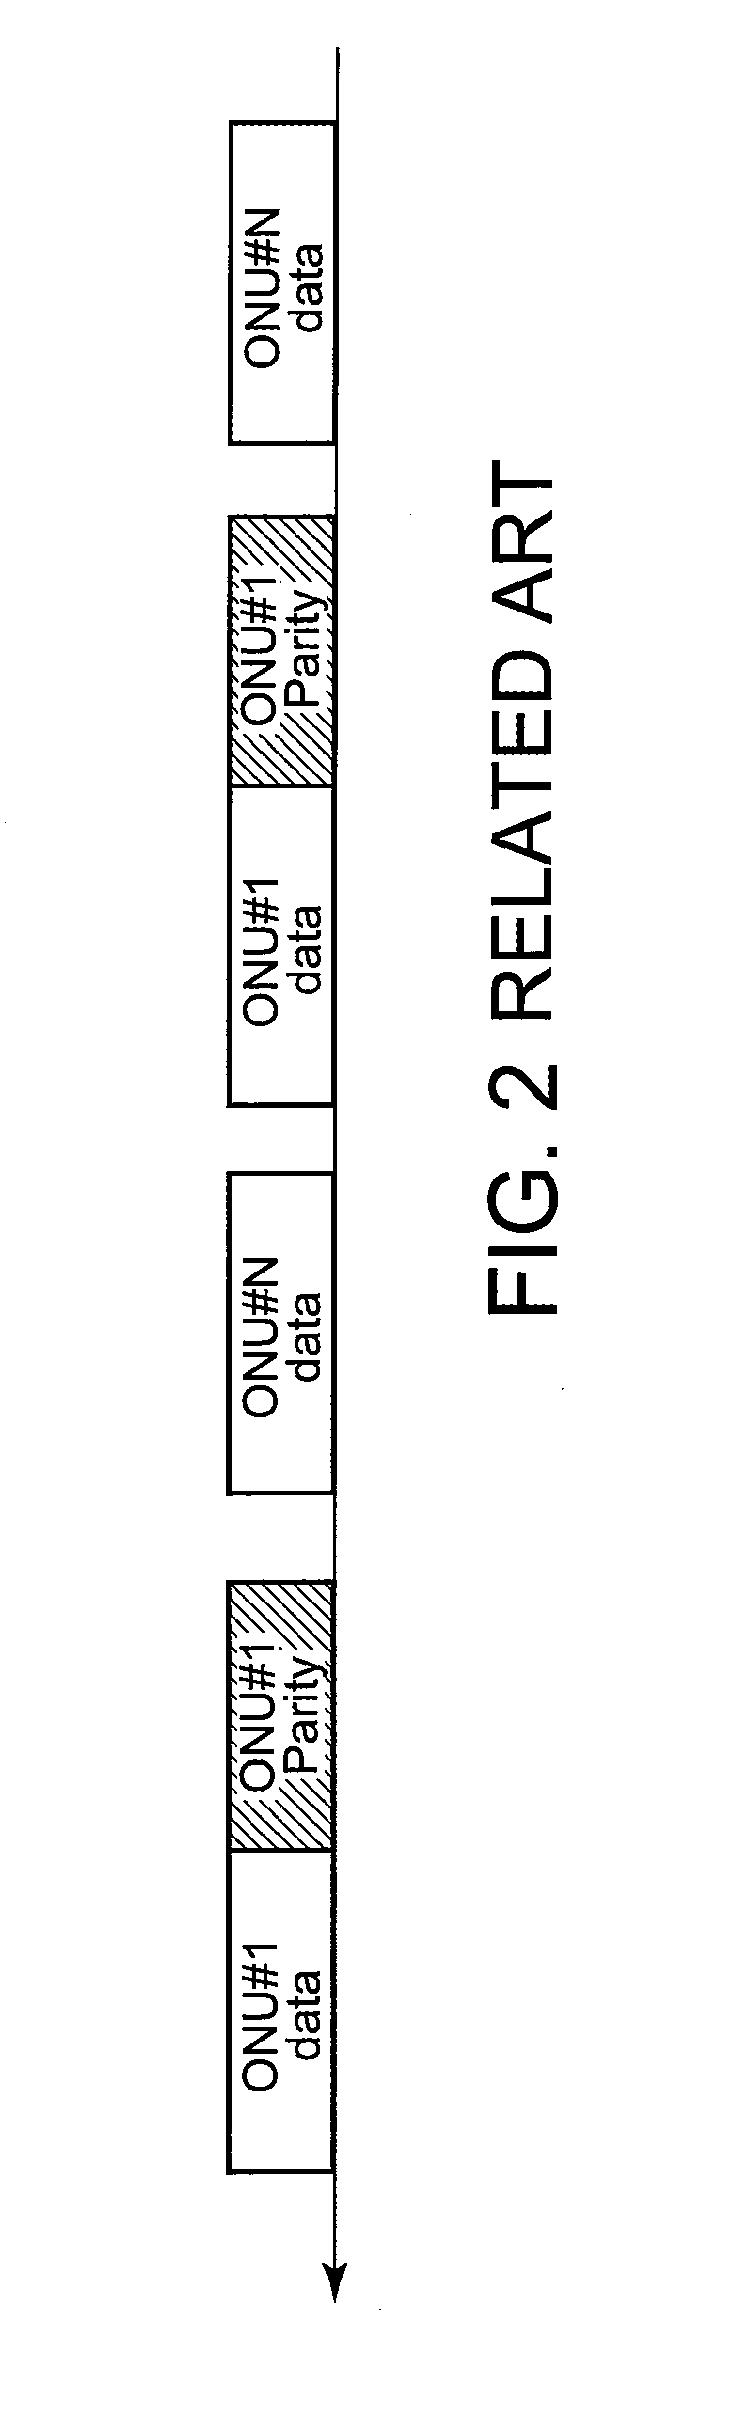 Optical communications system without using a special-purpose evaluation signal